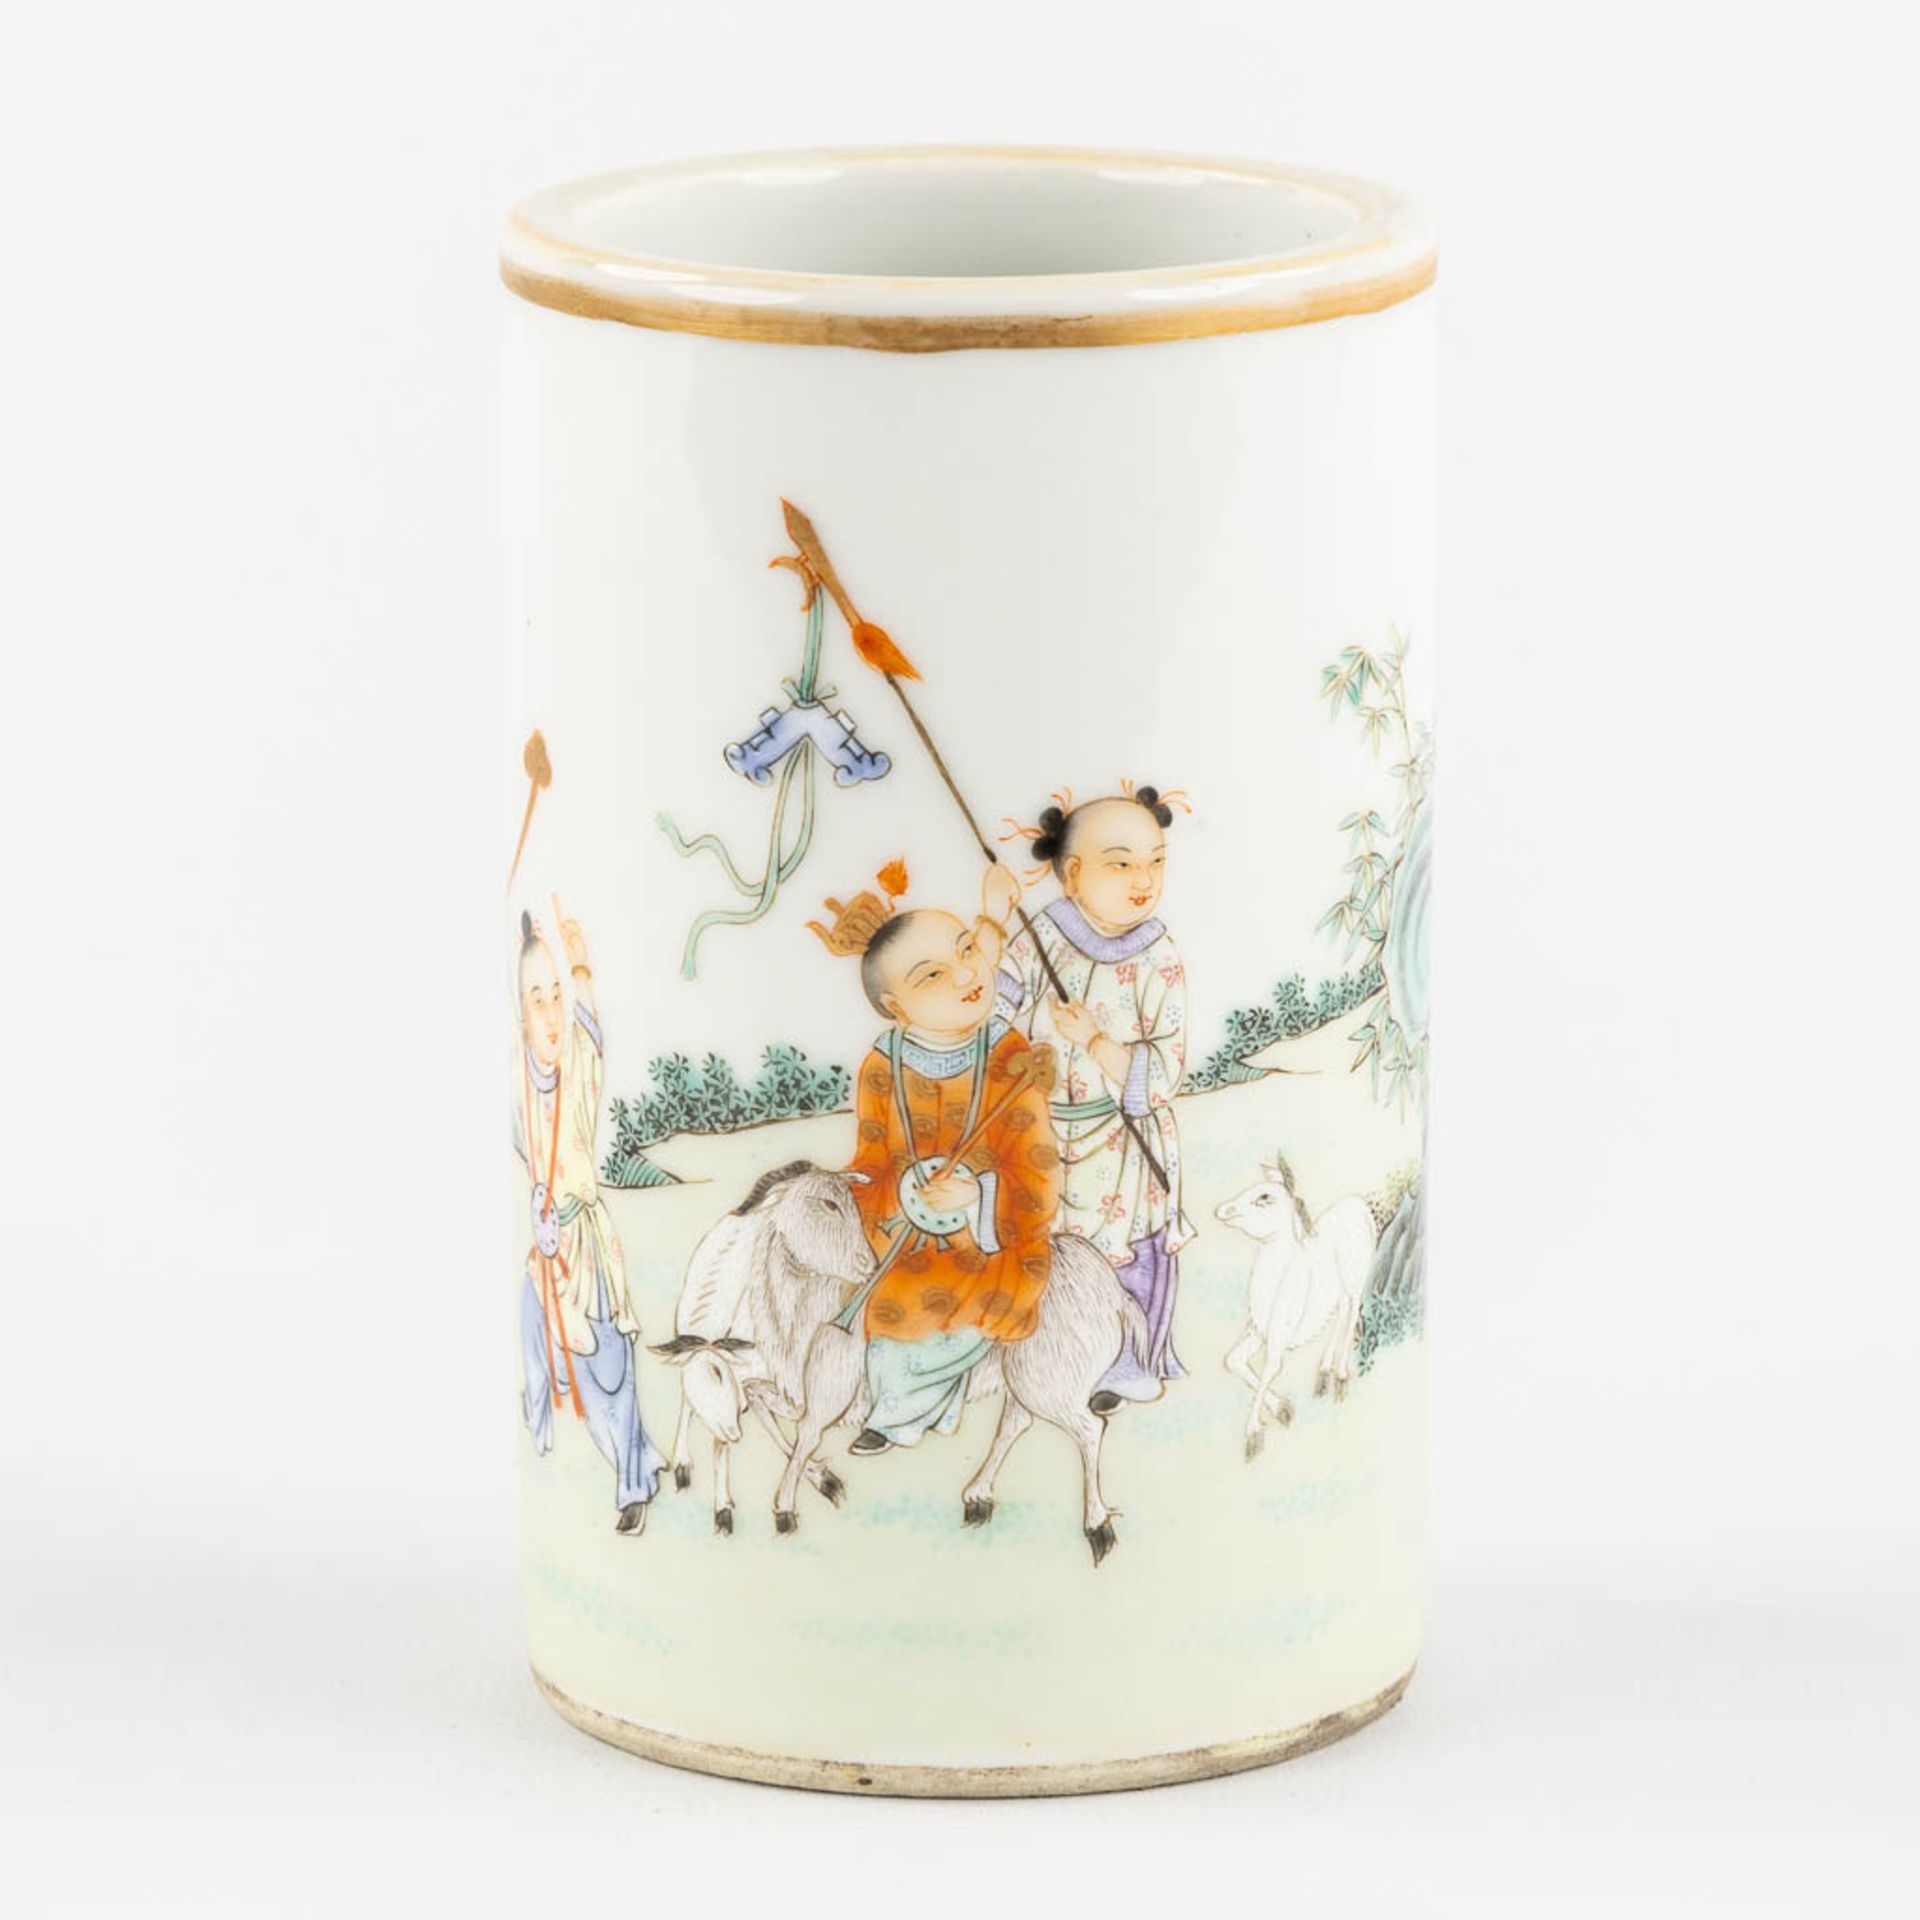 A small Chinese Brush Pot, decorated with Children in a parade, Qianlong mark. (H:12,5 x D:7,5 cm)